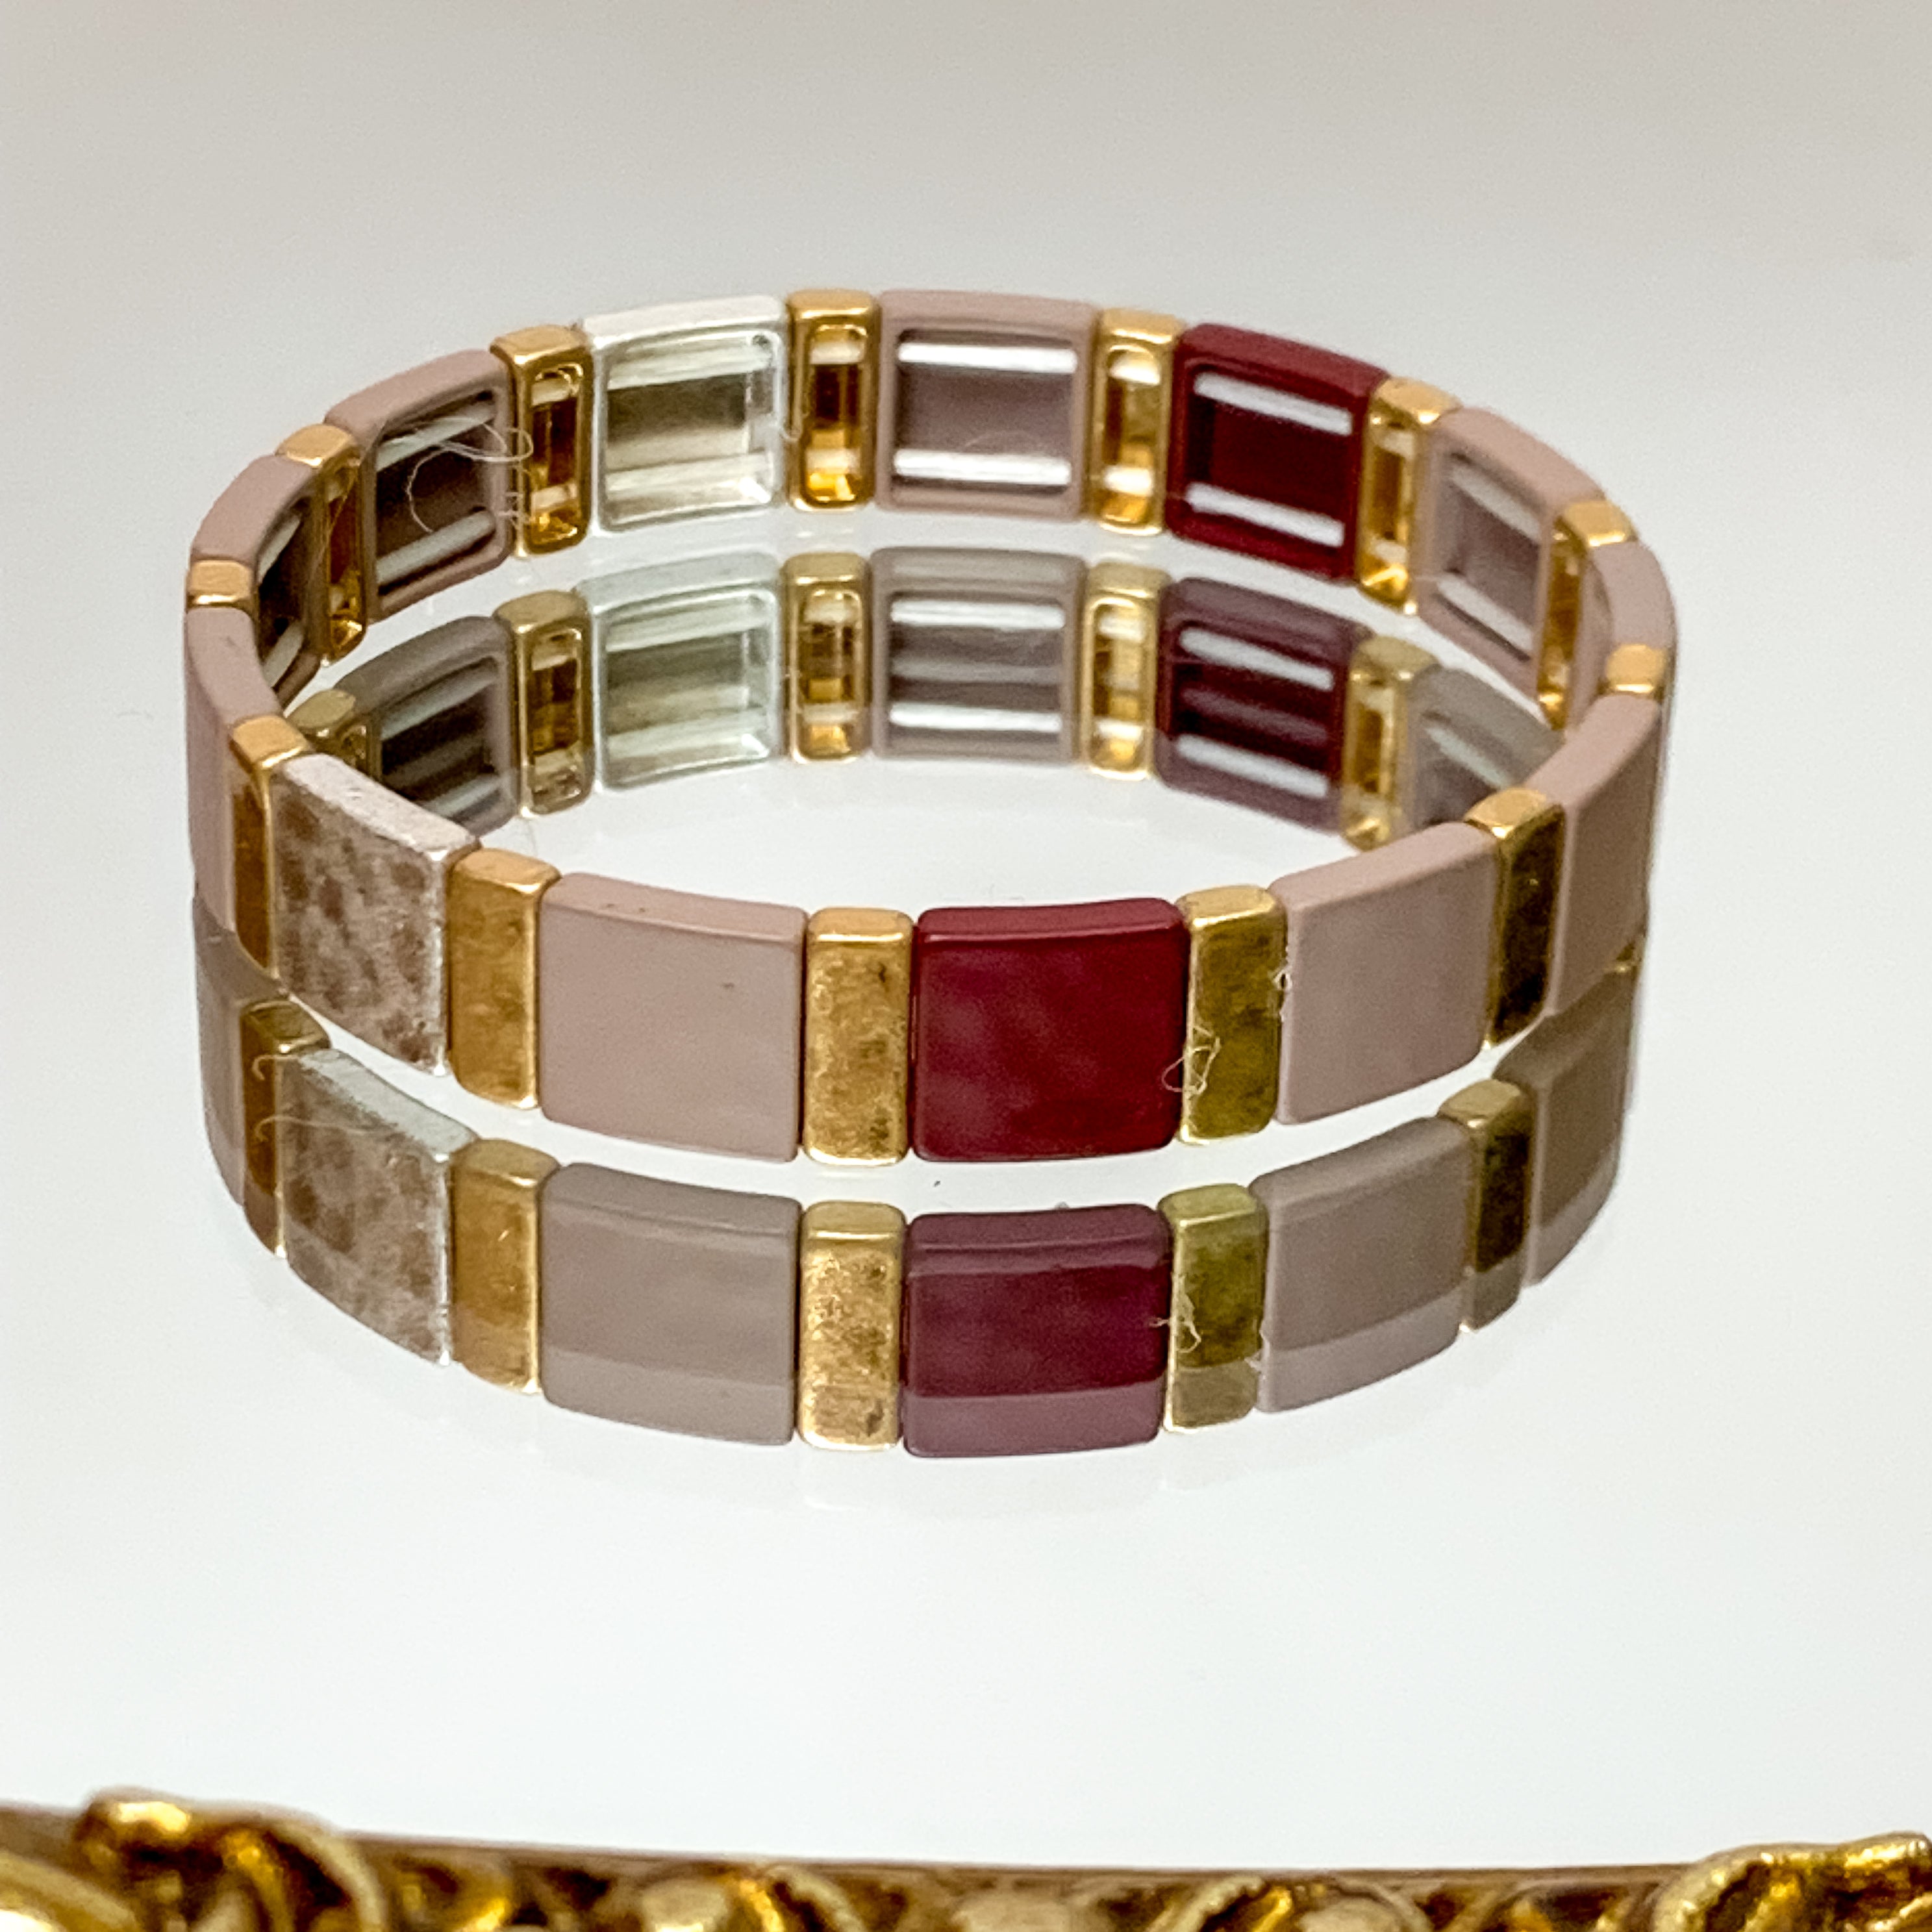 All About Matte Square Bracelet in Mauve and Maroon Mix - Giddy Up Glamour Boutique